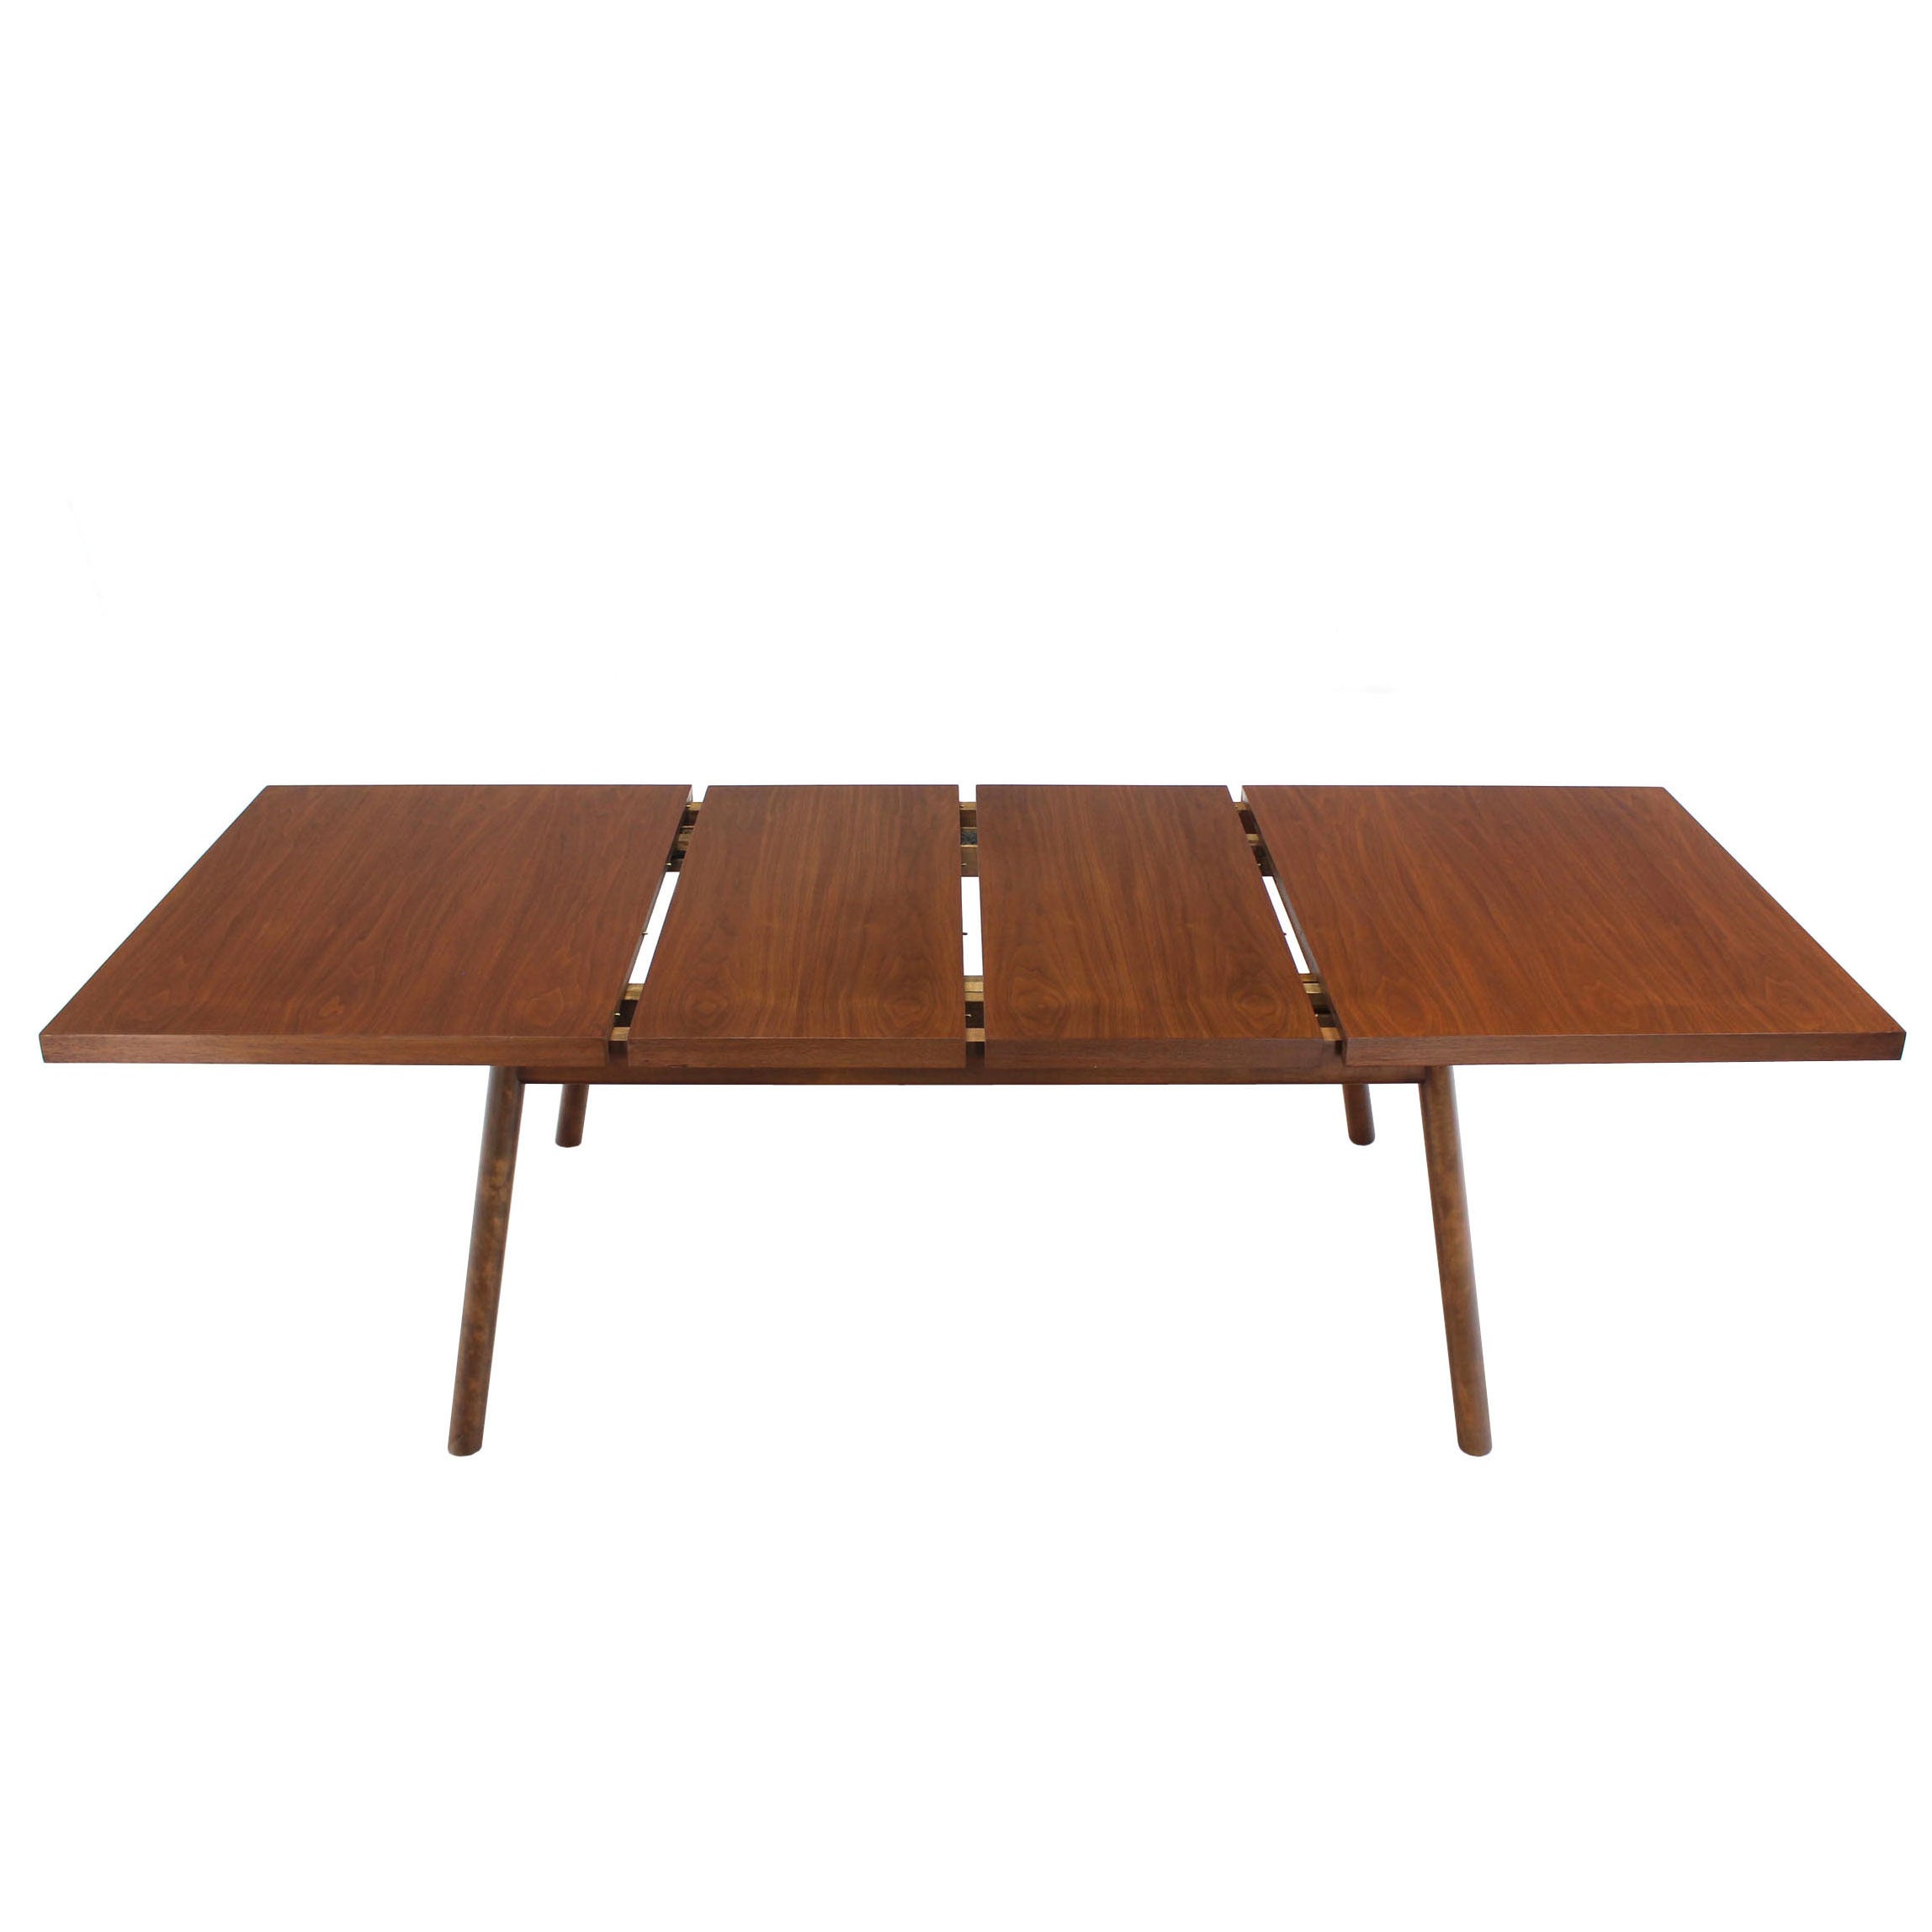 Robsjohn Gibbings Walnut Extention Dining Table with Two Leaves For Sale